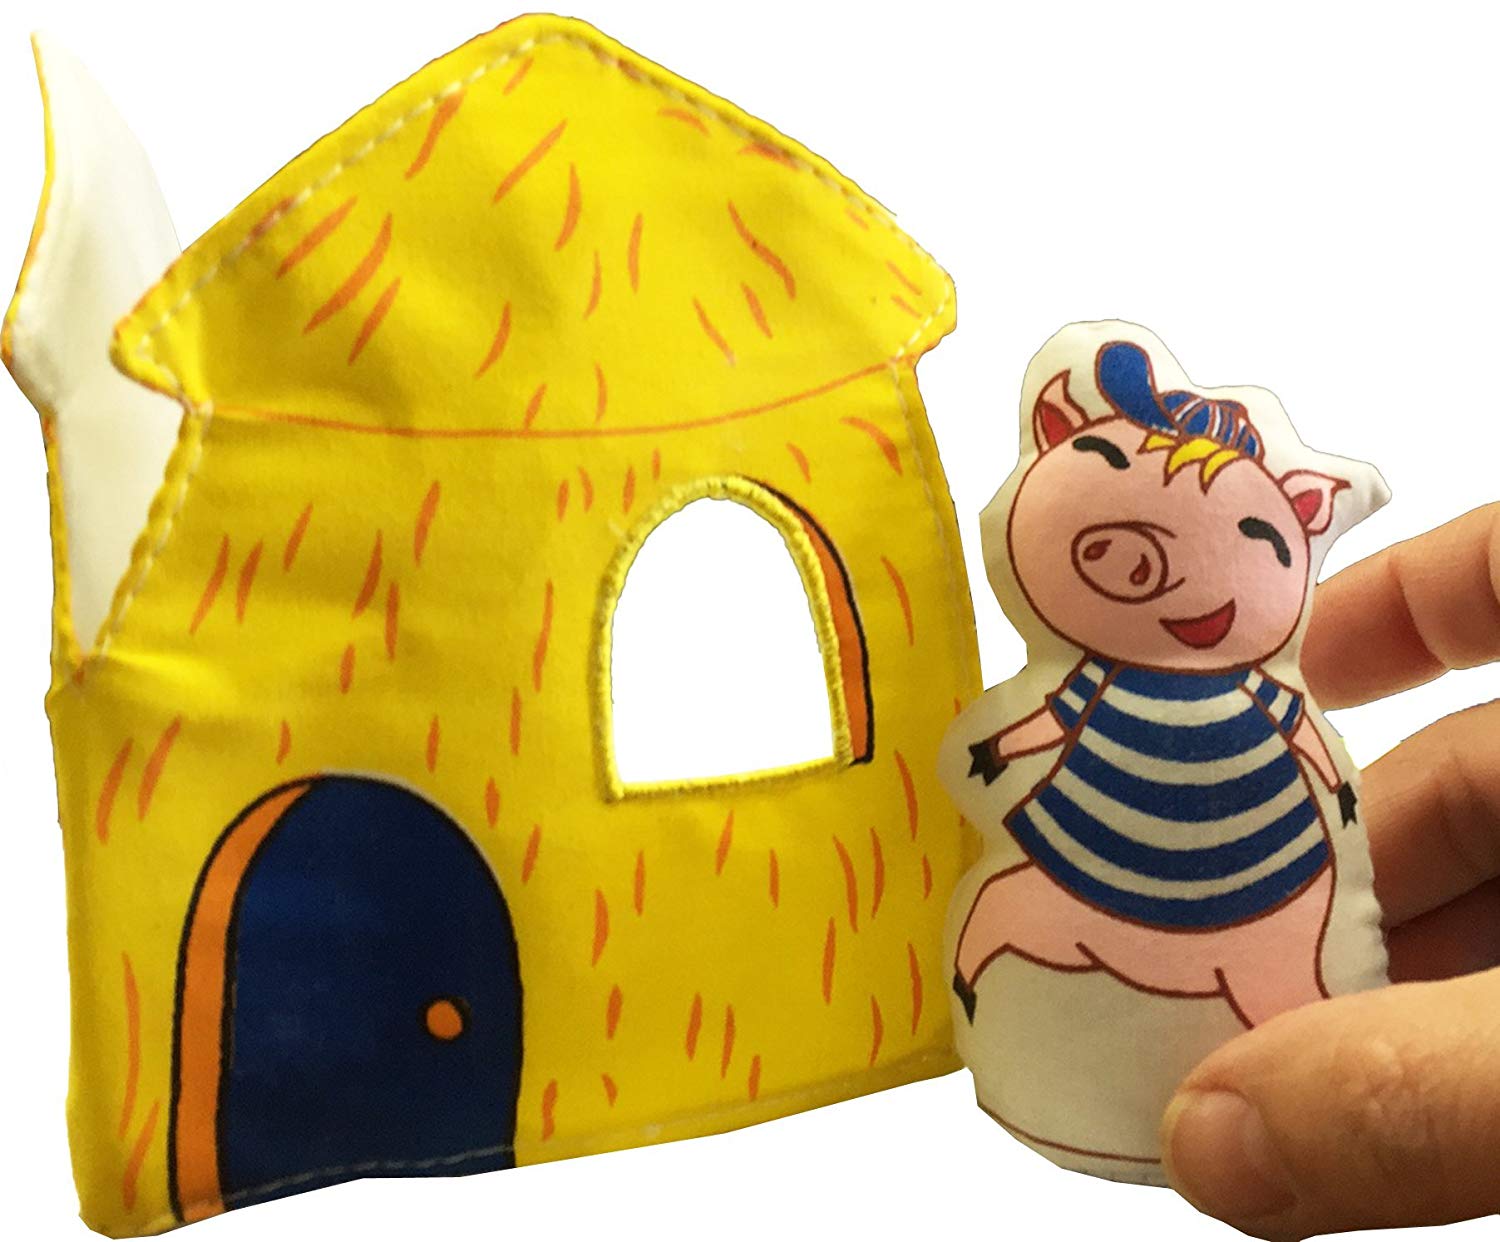 Pockets of Learning: Three Little Pigs Playset